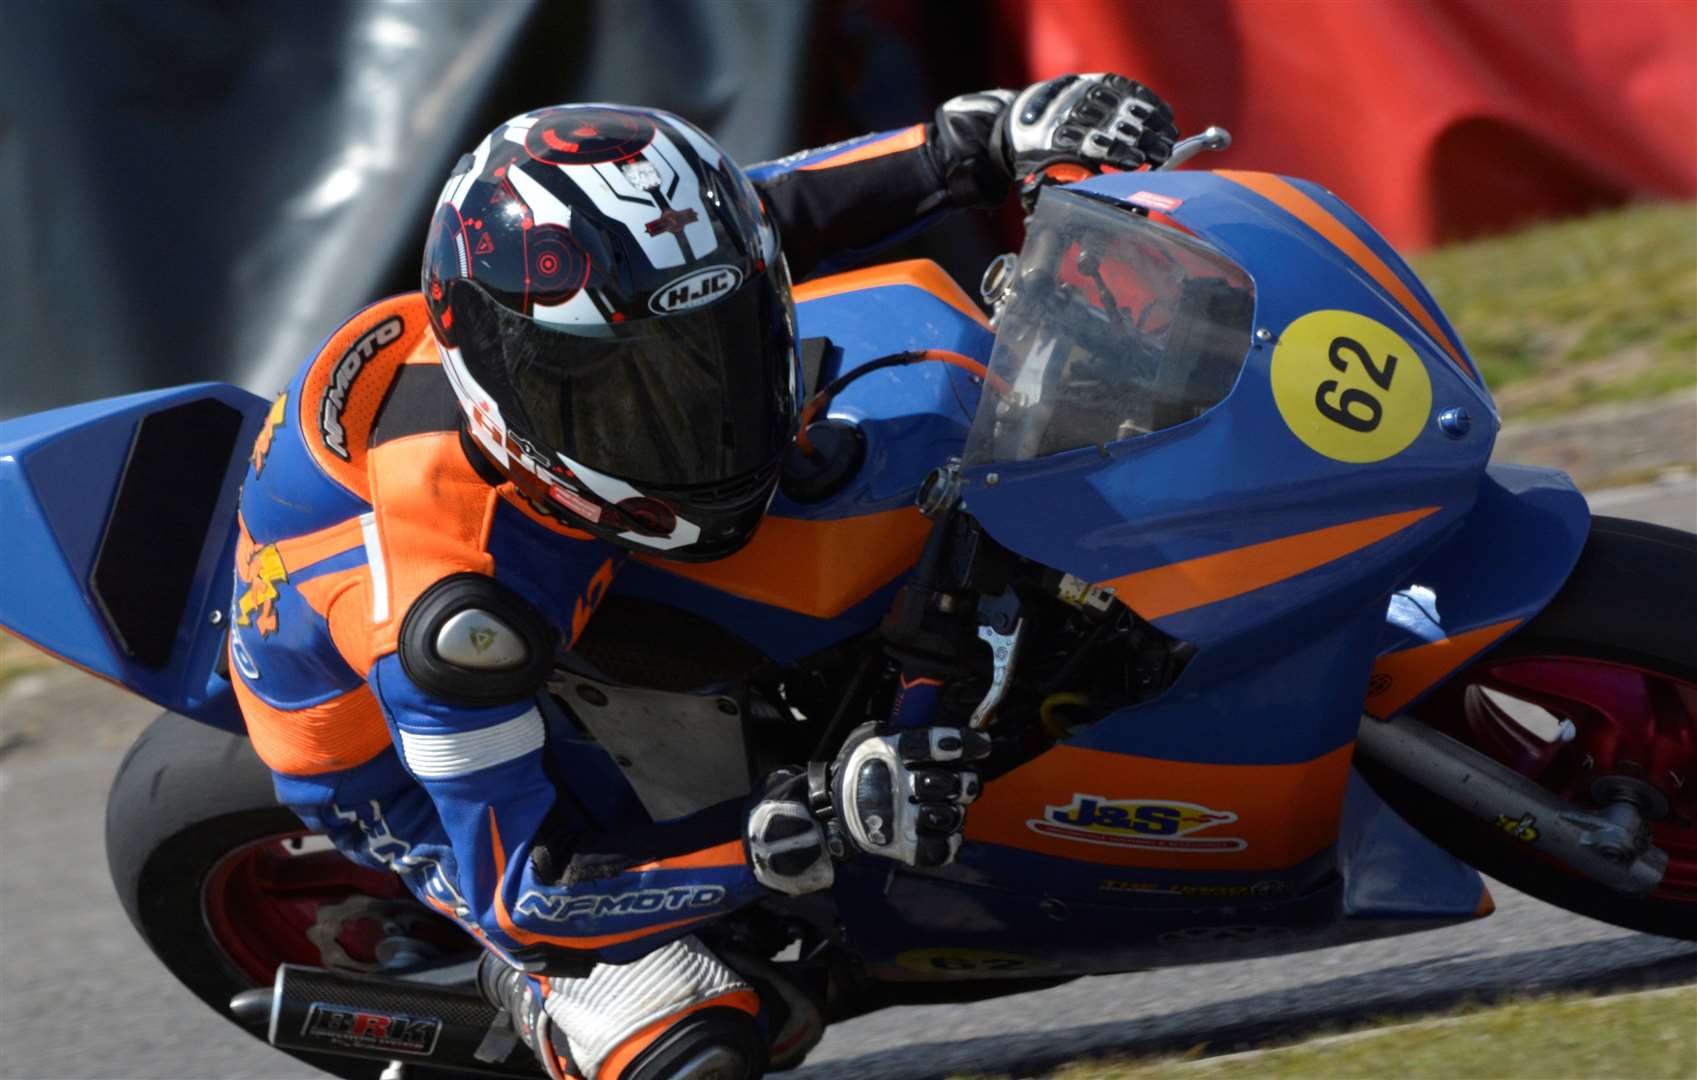 Ethan Sparks won another British Minibike title after steeping up to the 70cc class